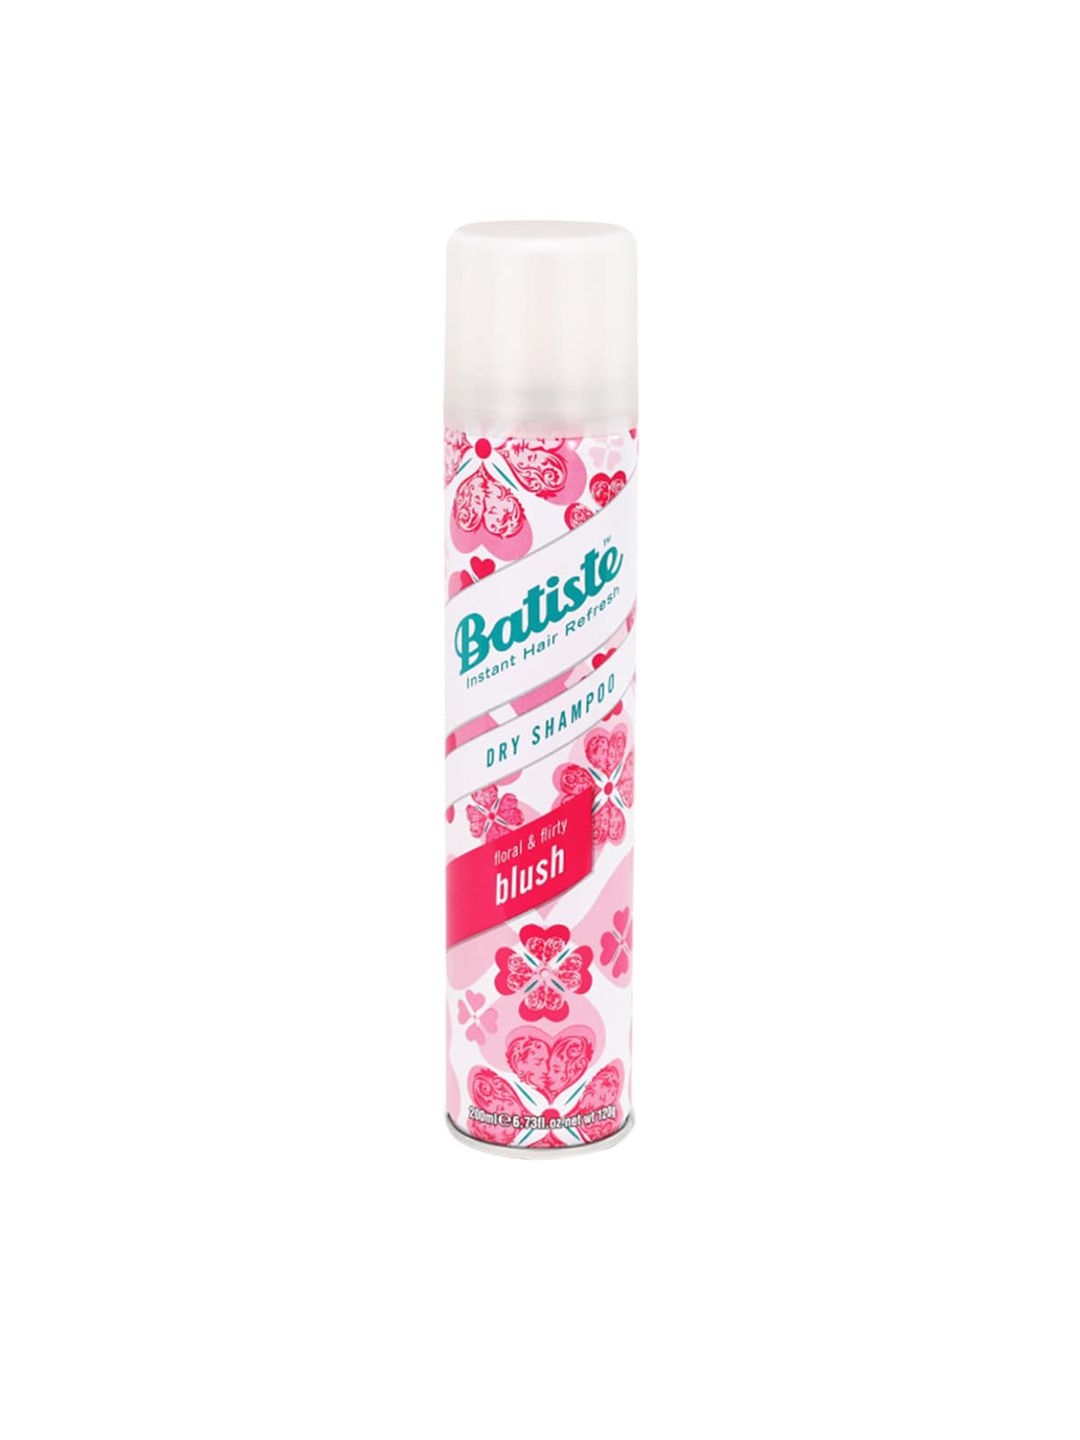 Batiste Instant Hair Refresh Floral & Fruity Blush Dry Shampoo - 200 ml Price in India